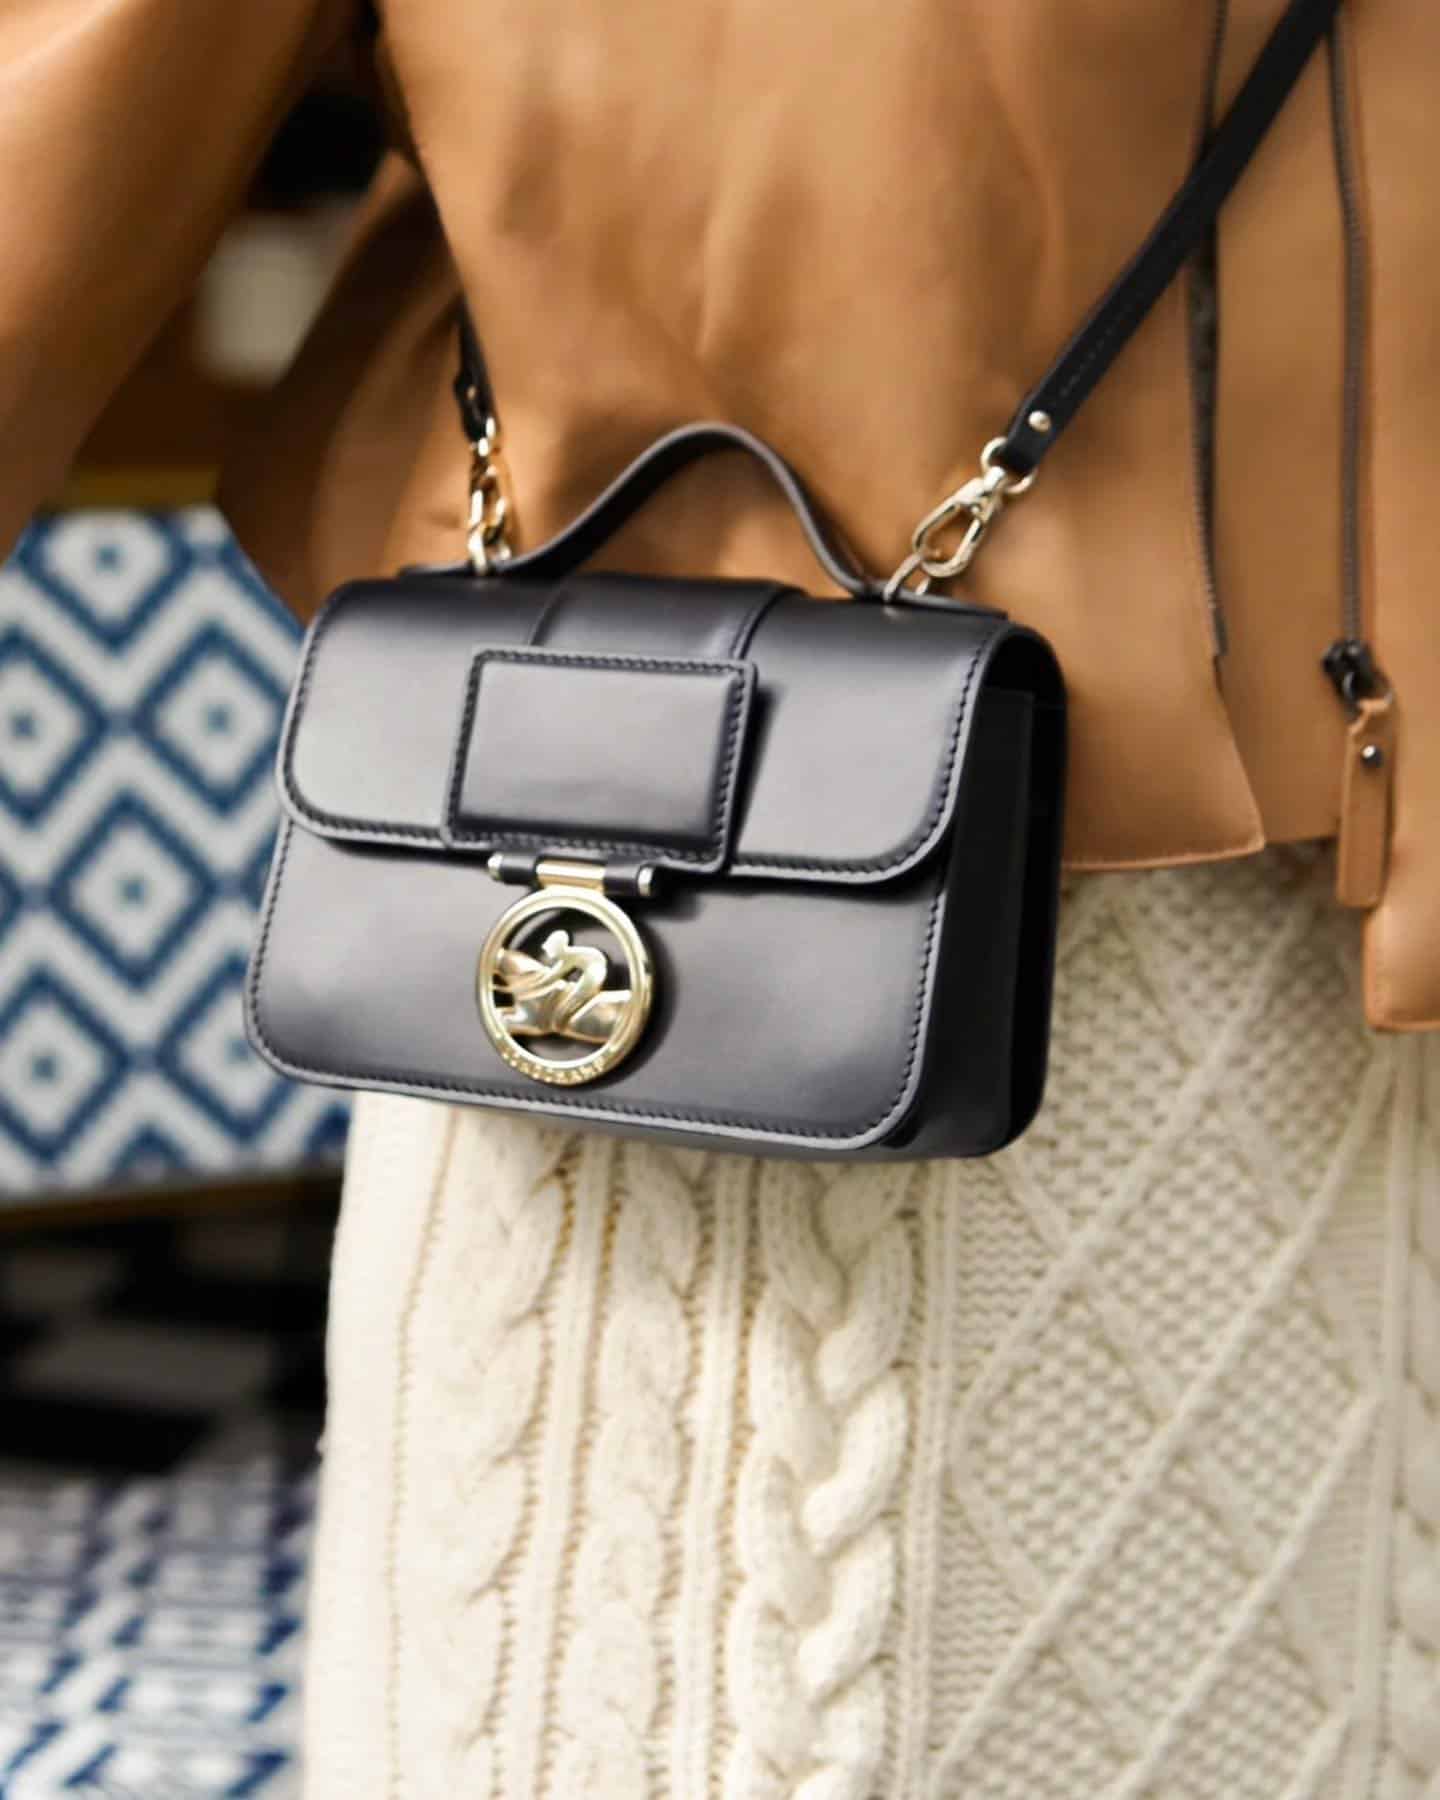 The most popular longchamp bags